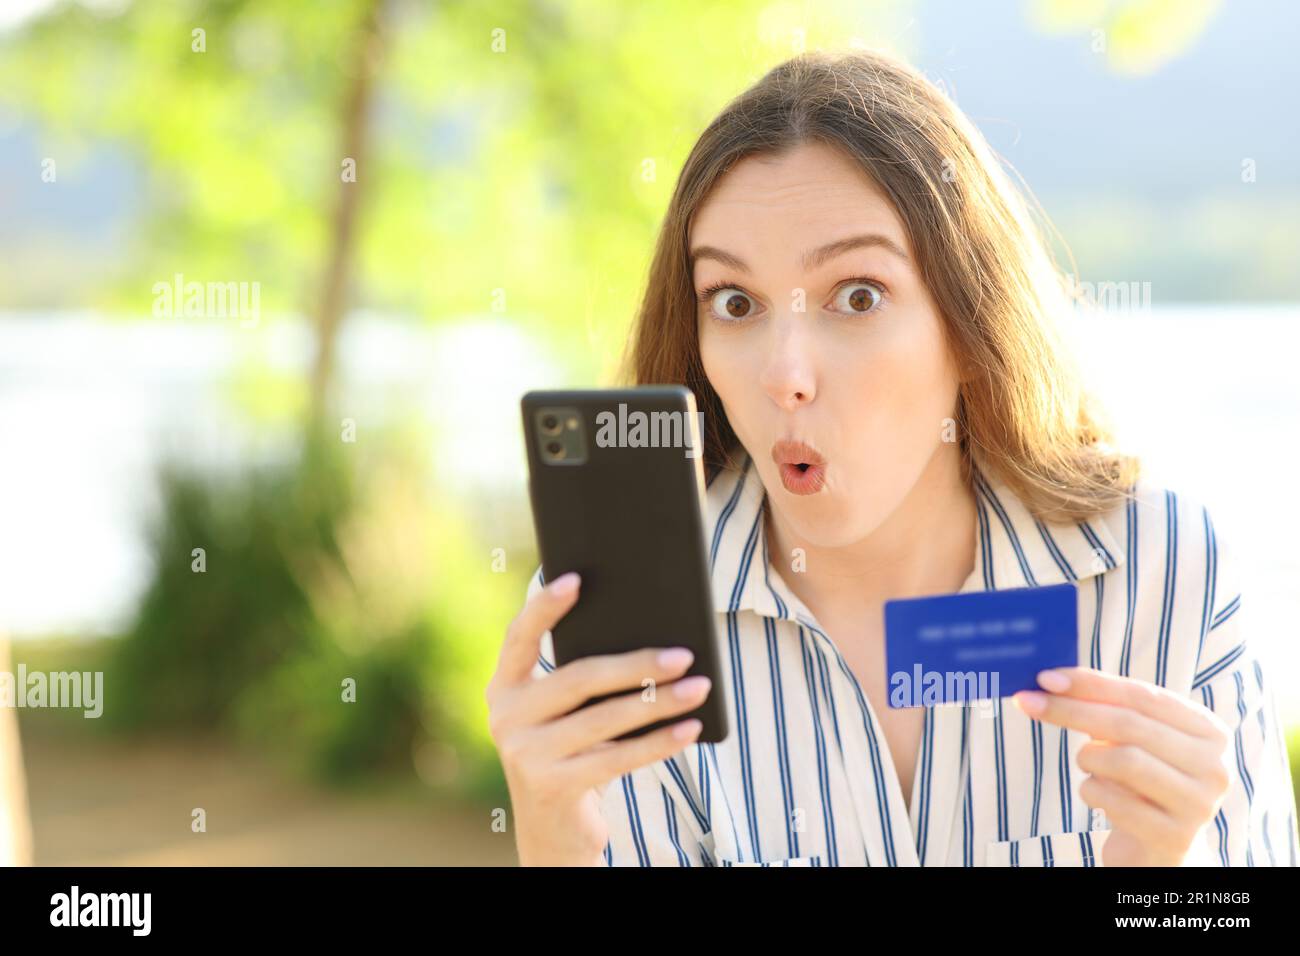 Surprised online buyer holding phone and credit card looks at you in nature Stock Photo